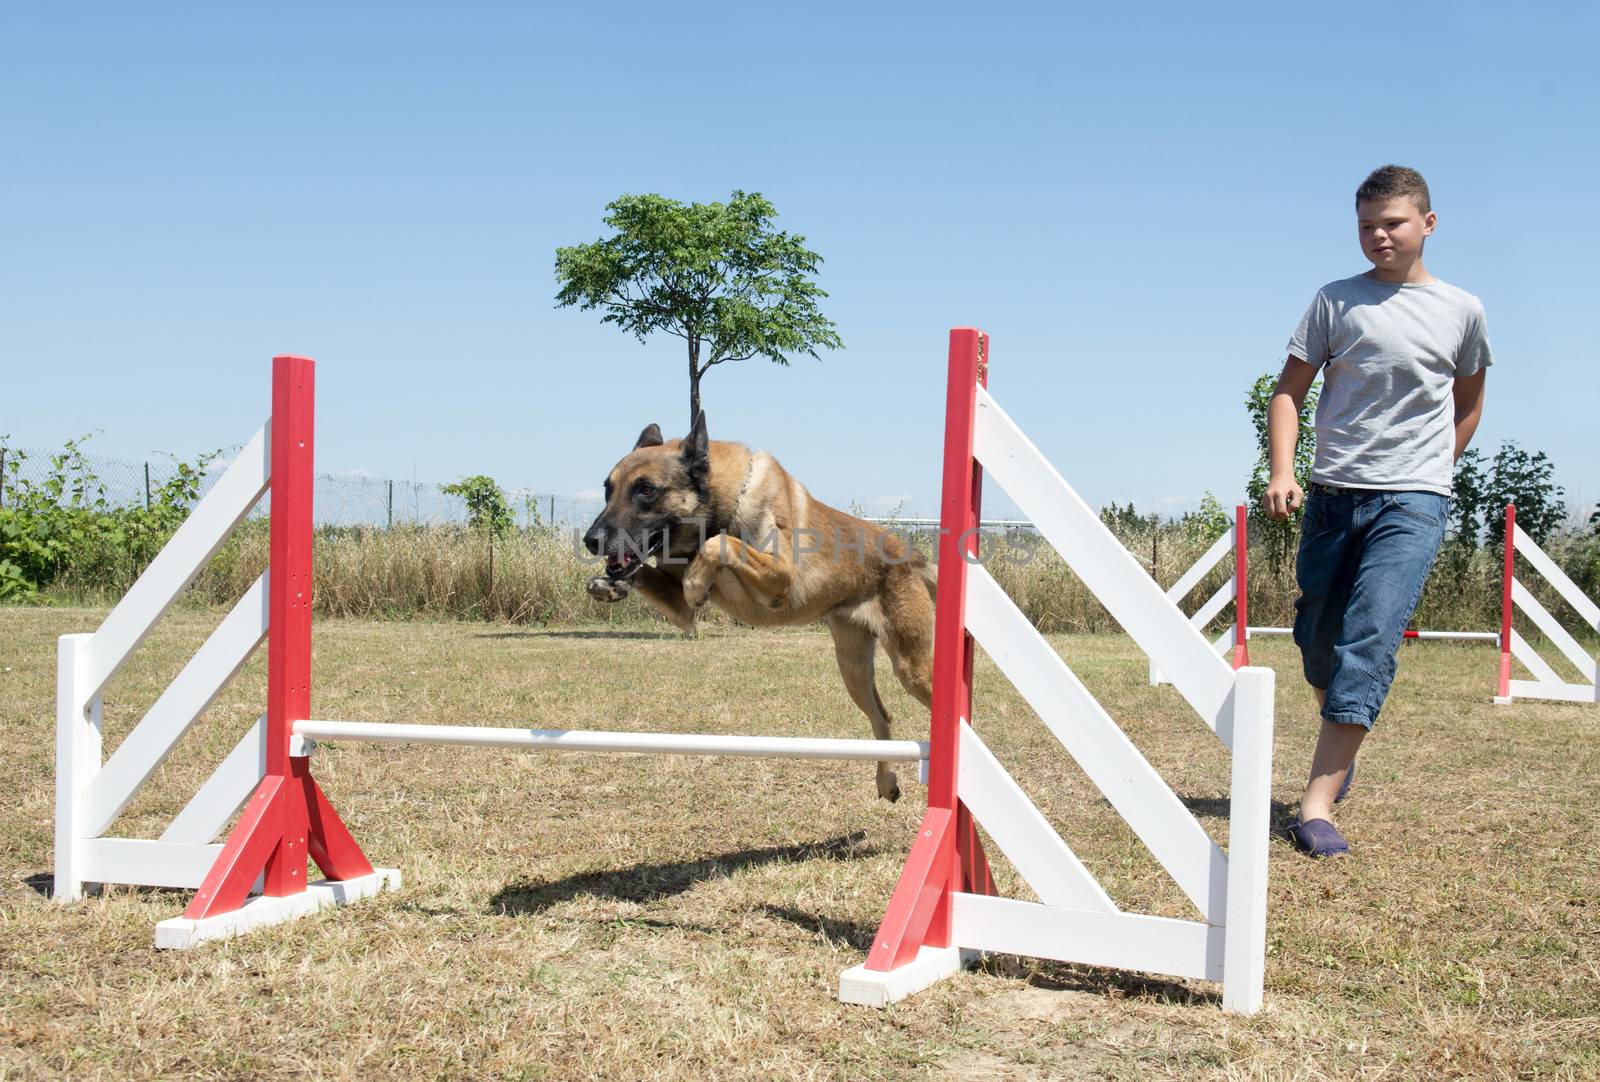 teenager and dog in agility by cynoclub